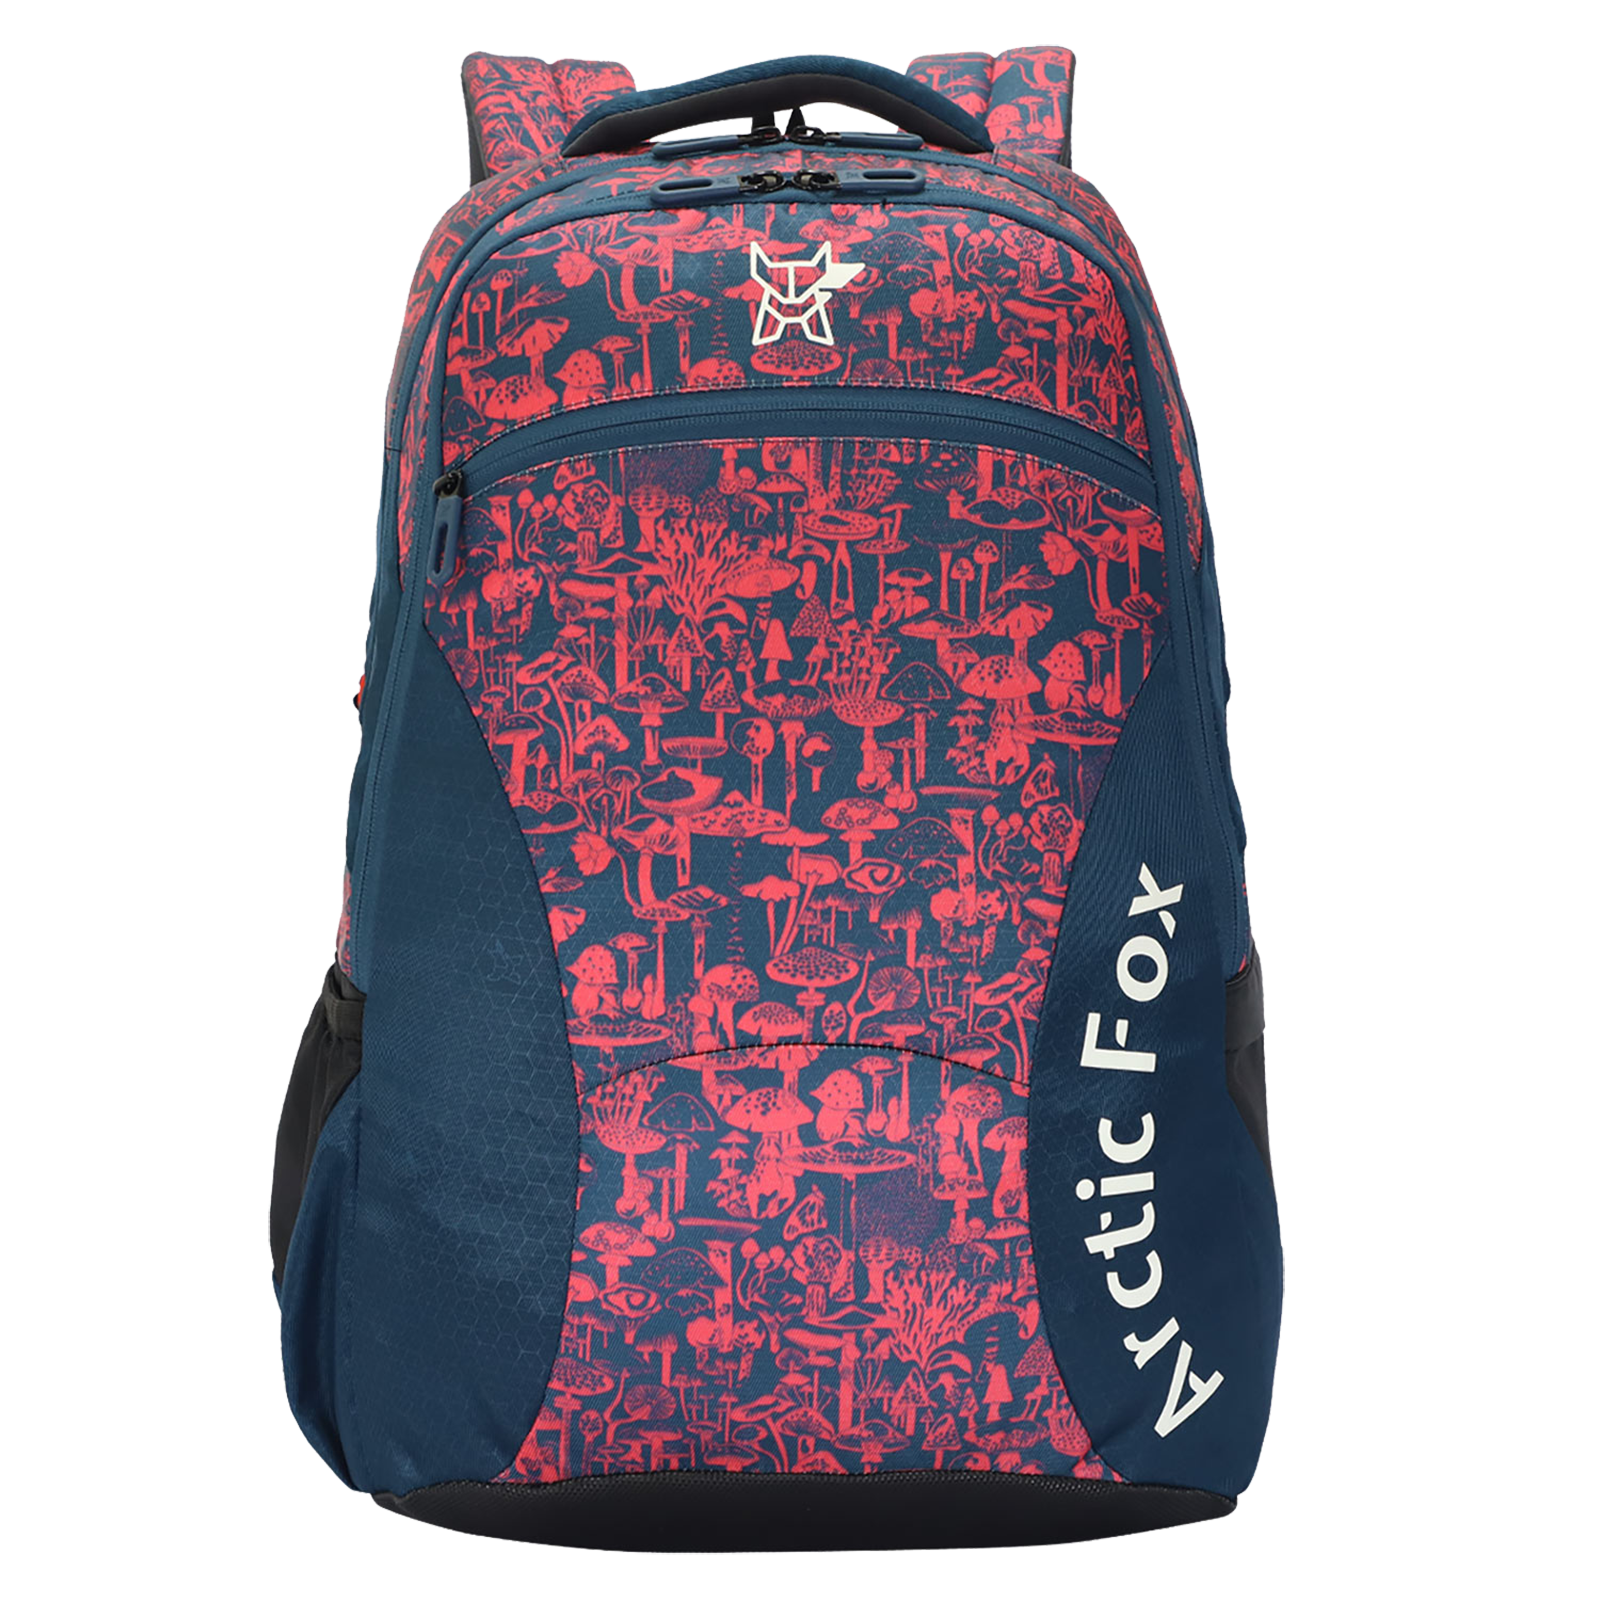 Arctic Fox Mushroom 36 Litres PU Coated Polyester Backpack (2 Spacious Compartments, FJUBPKSPTON057036, Seaport)_1